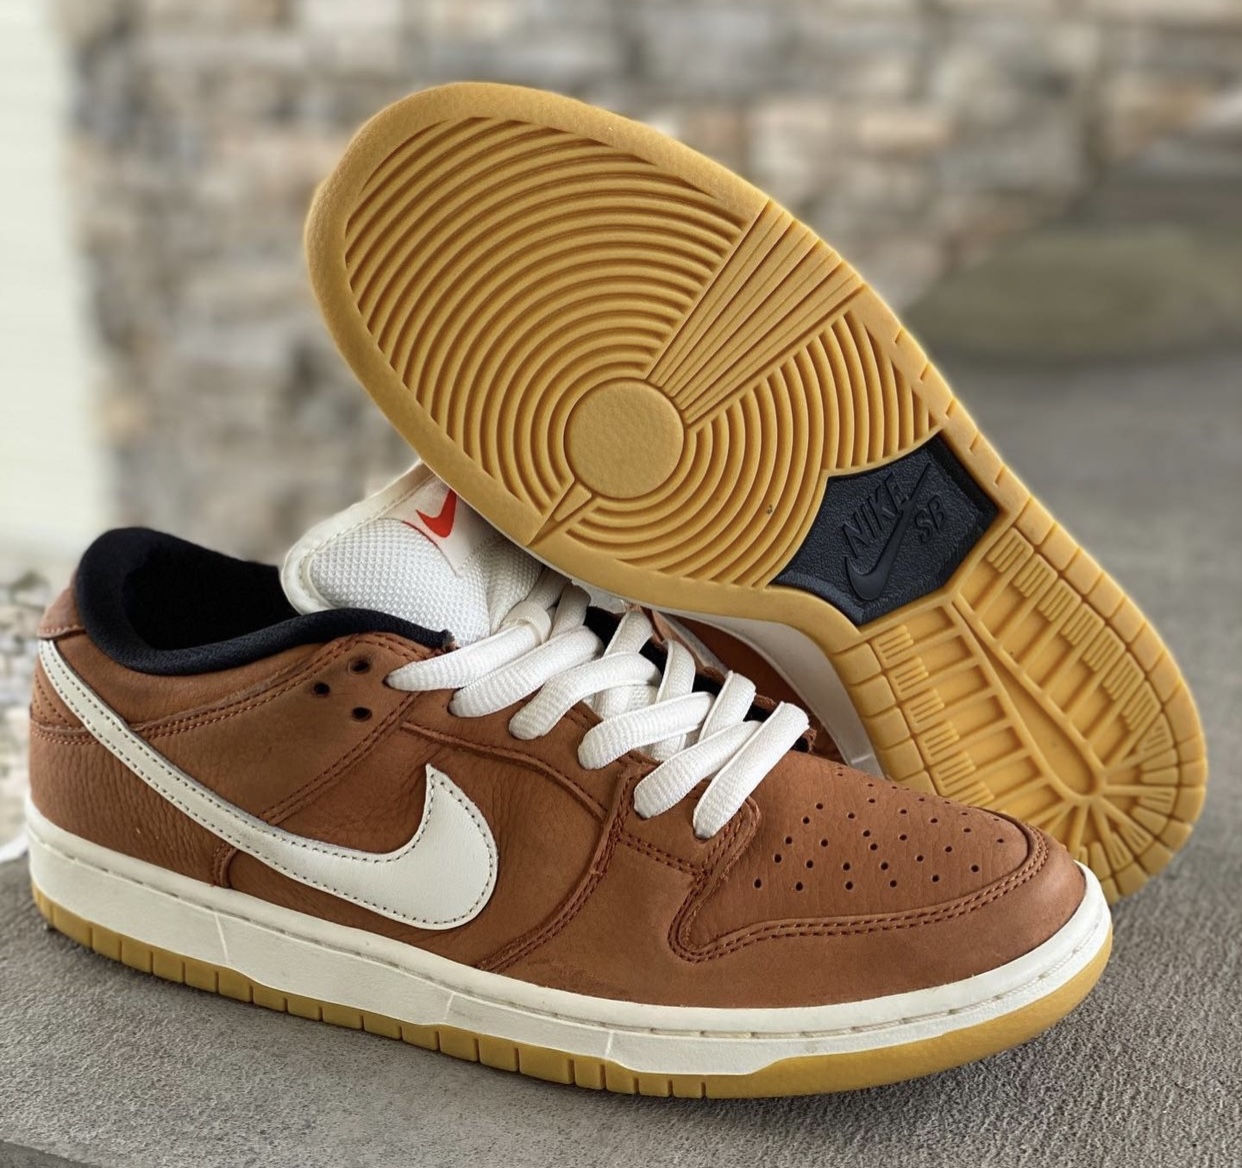 Nike SB Dunk Low Dark Russet DH1319 200 Release Date Pricing 4